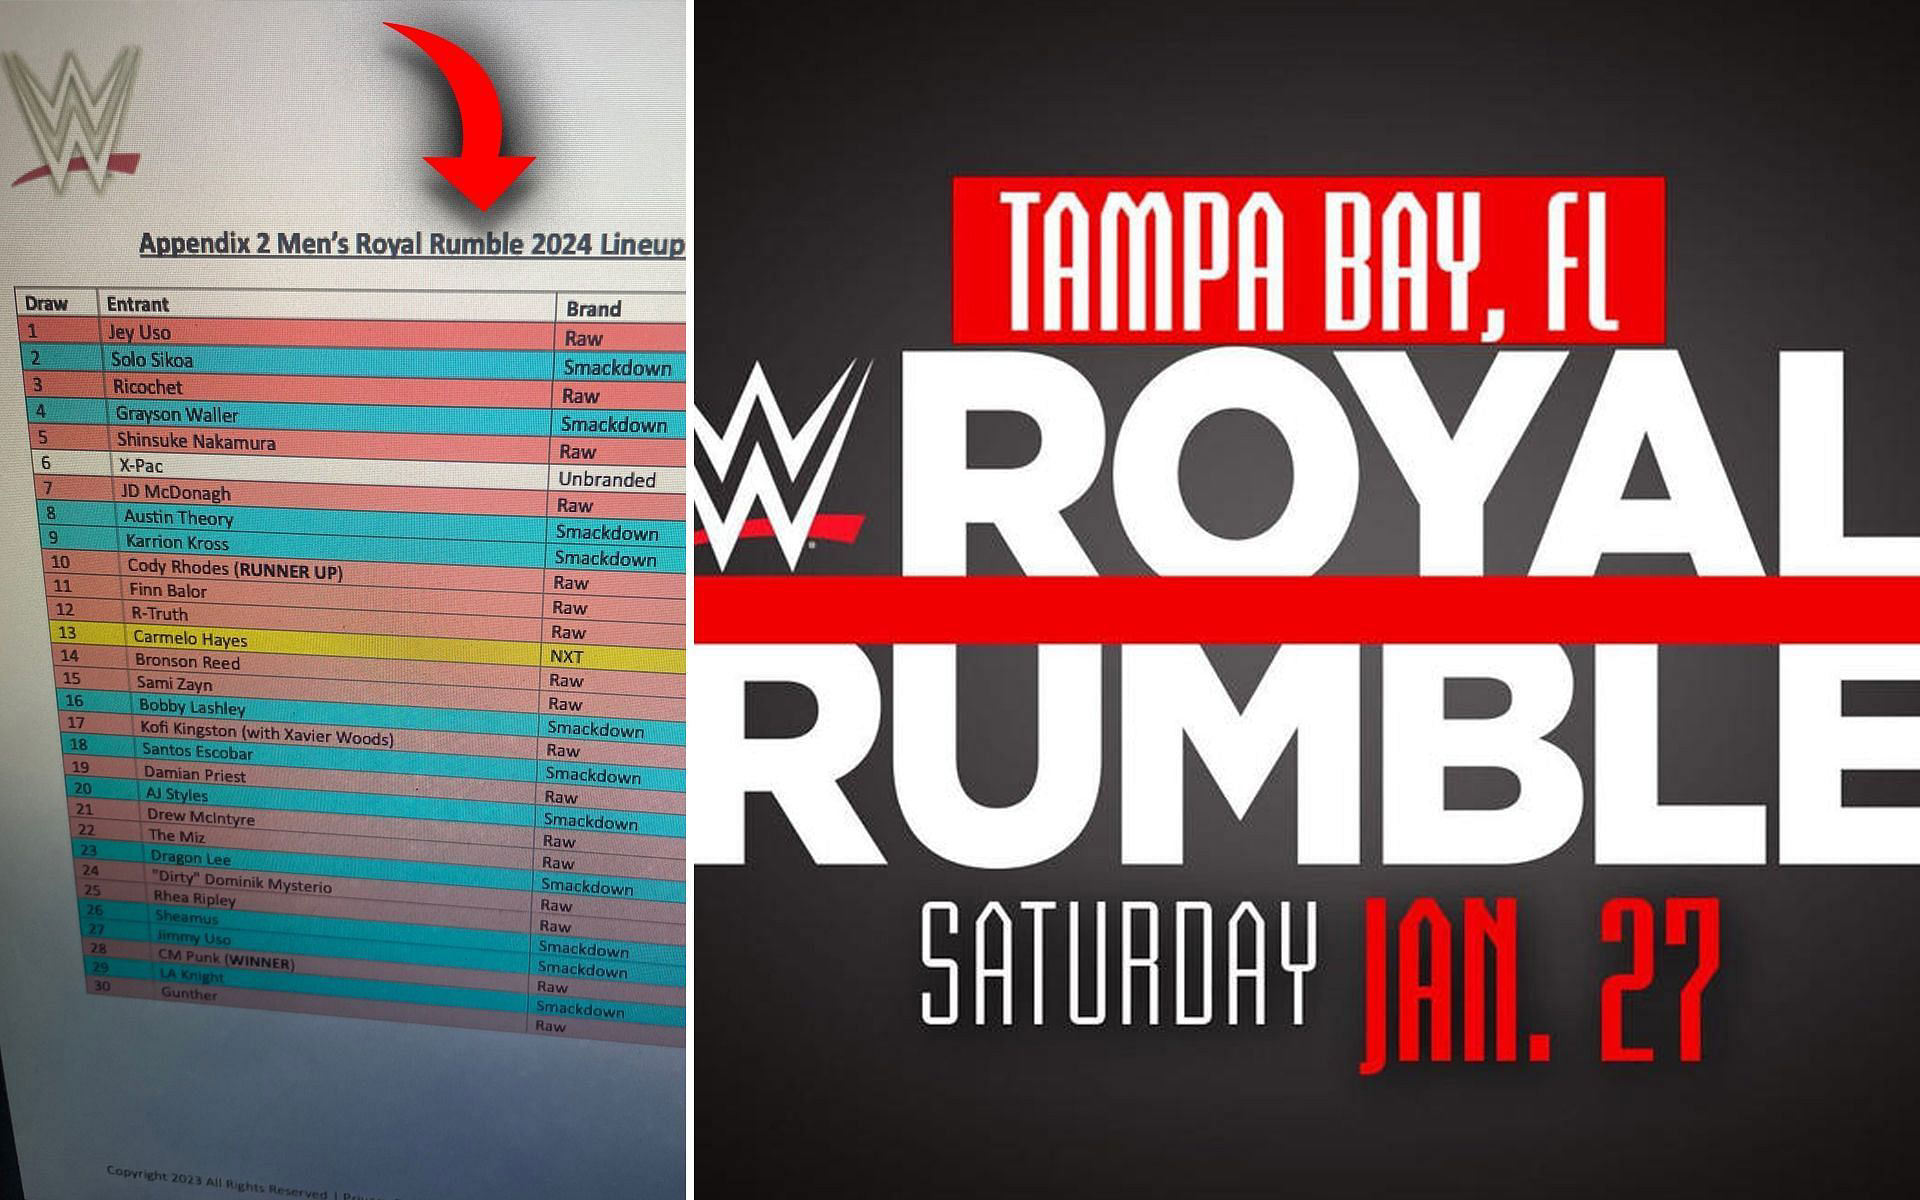 WWE Royal Rumble 2024 participants leaked Is it real or fake?